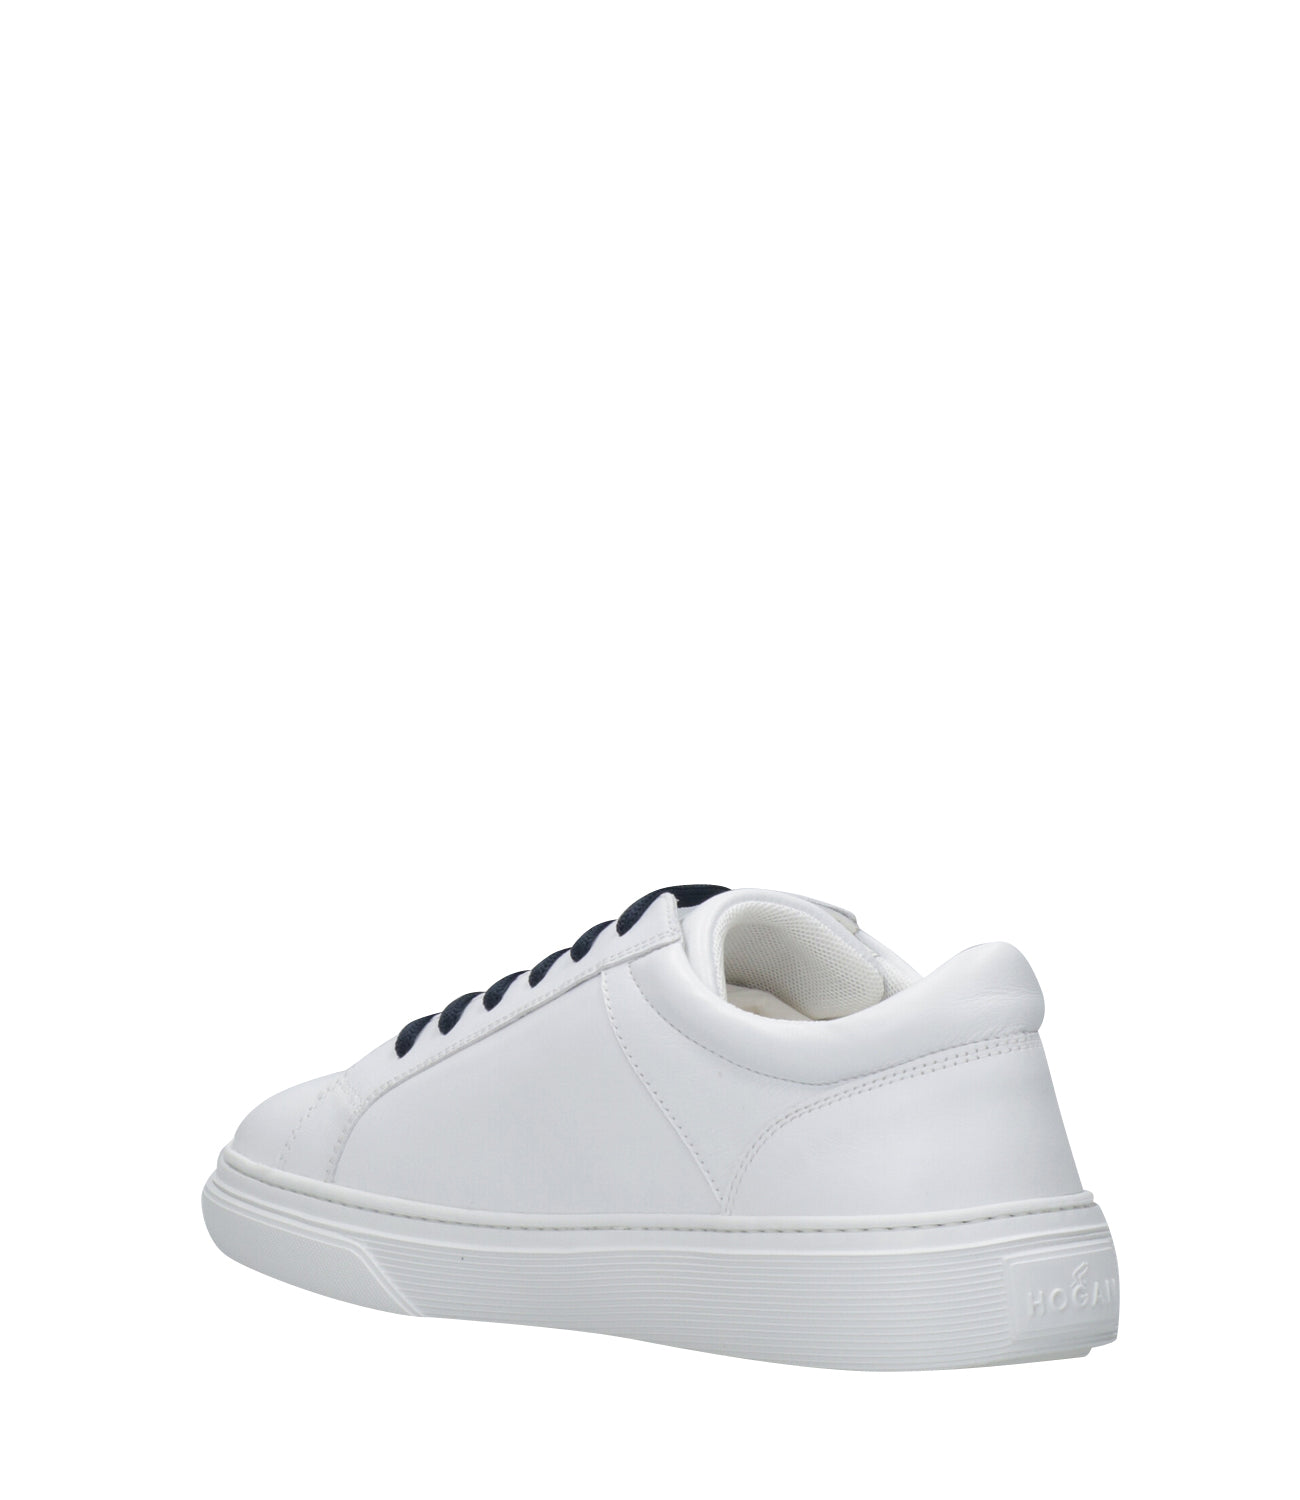 Hogan Junior | Sneakers R365 White and Blue